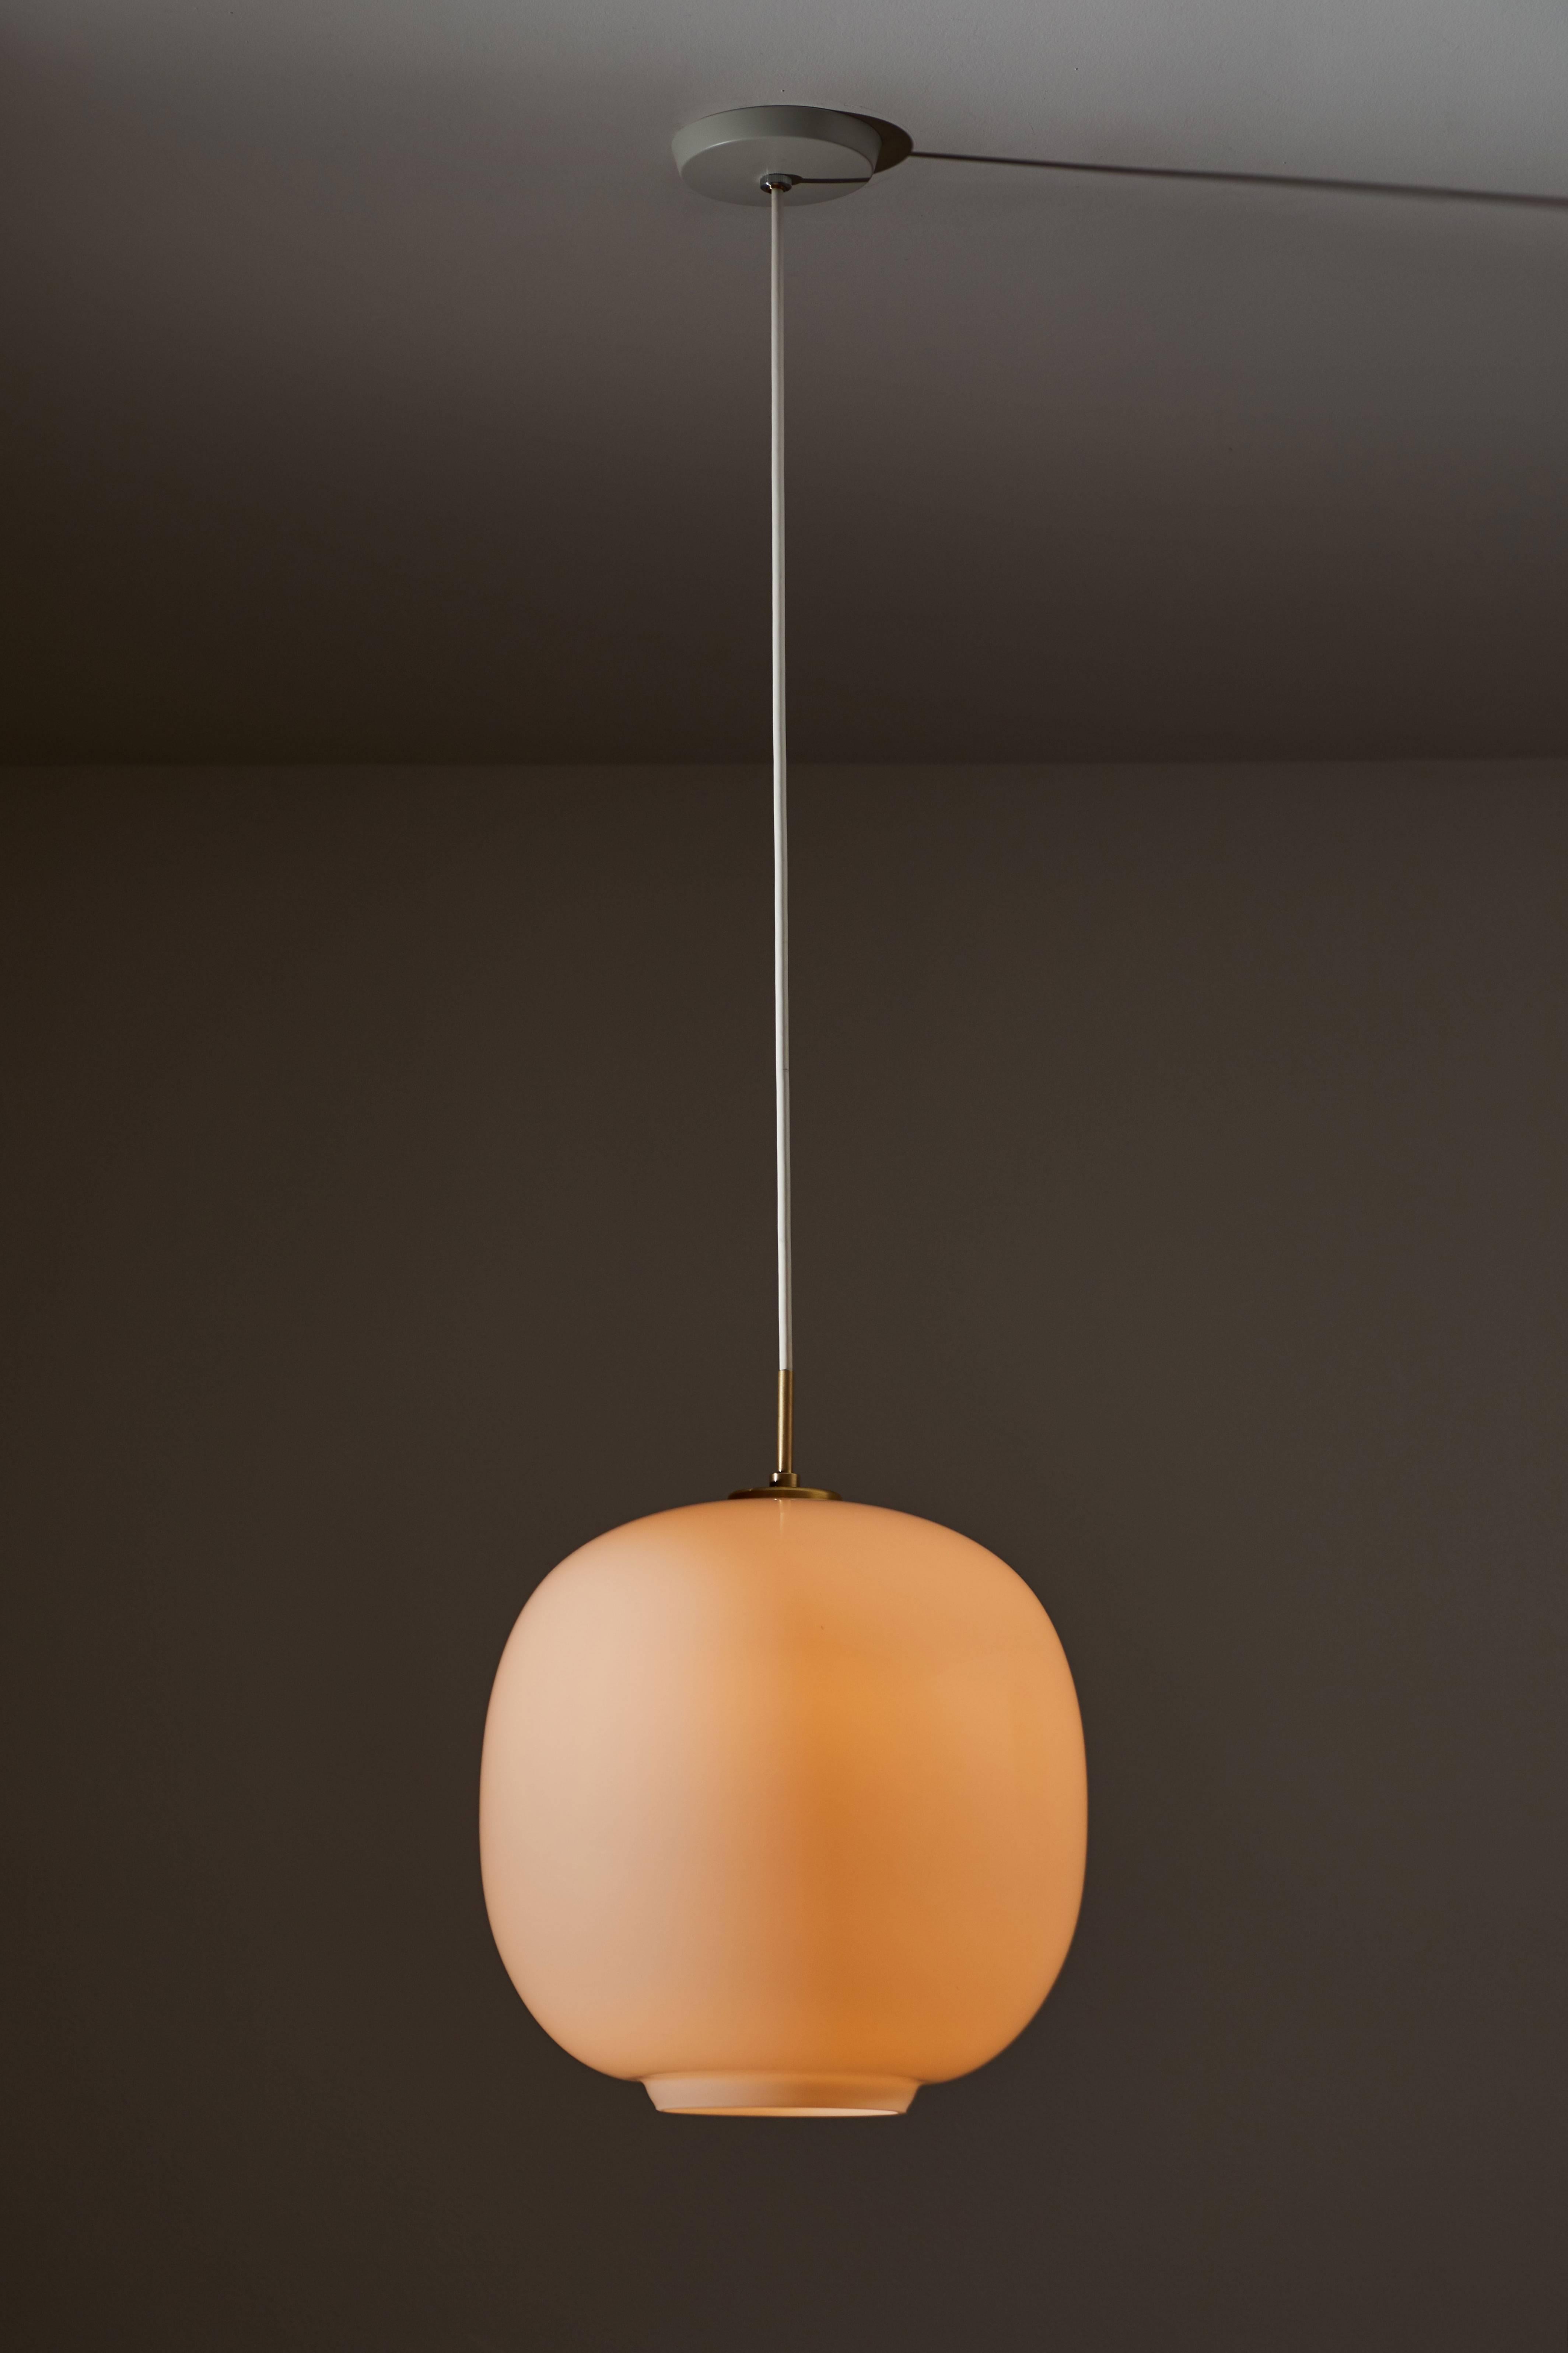 Large Radiohus VL45 Pendant by Vilhelm Lauritzen for Louis Poulsen. Current production designed and manufactured in Denmark. Opaline glass and brass Hardware. Currently, the VL 45 Radiohus Pendant Light is being reintroduced with the same original